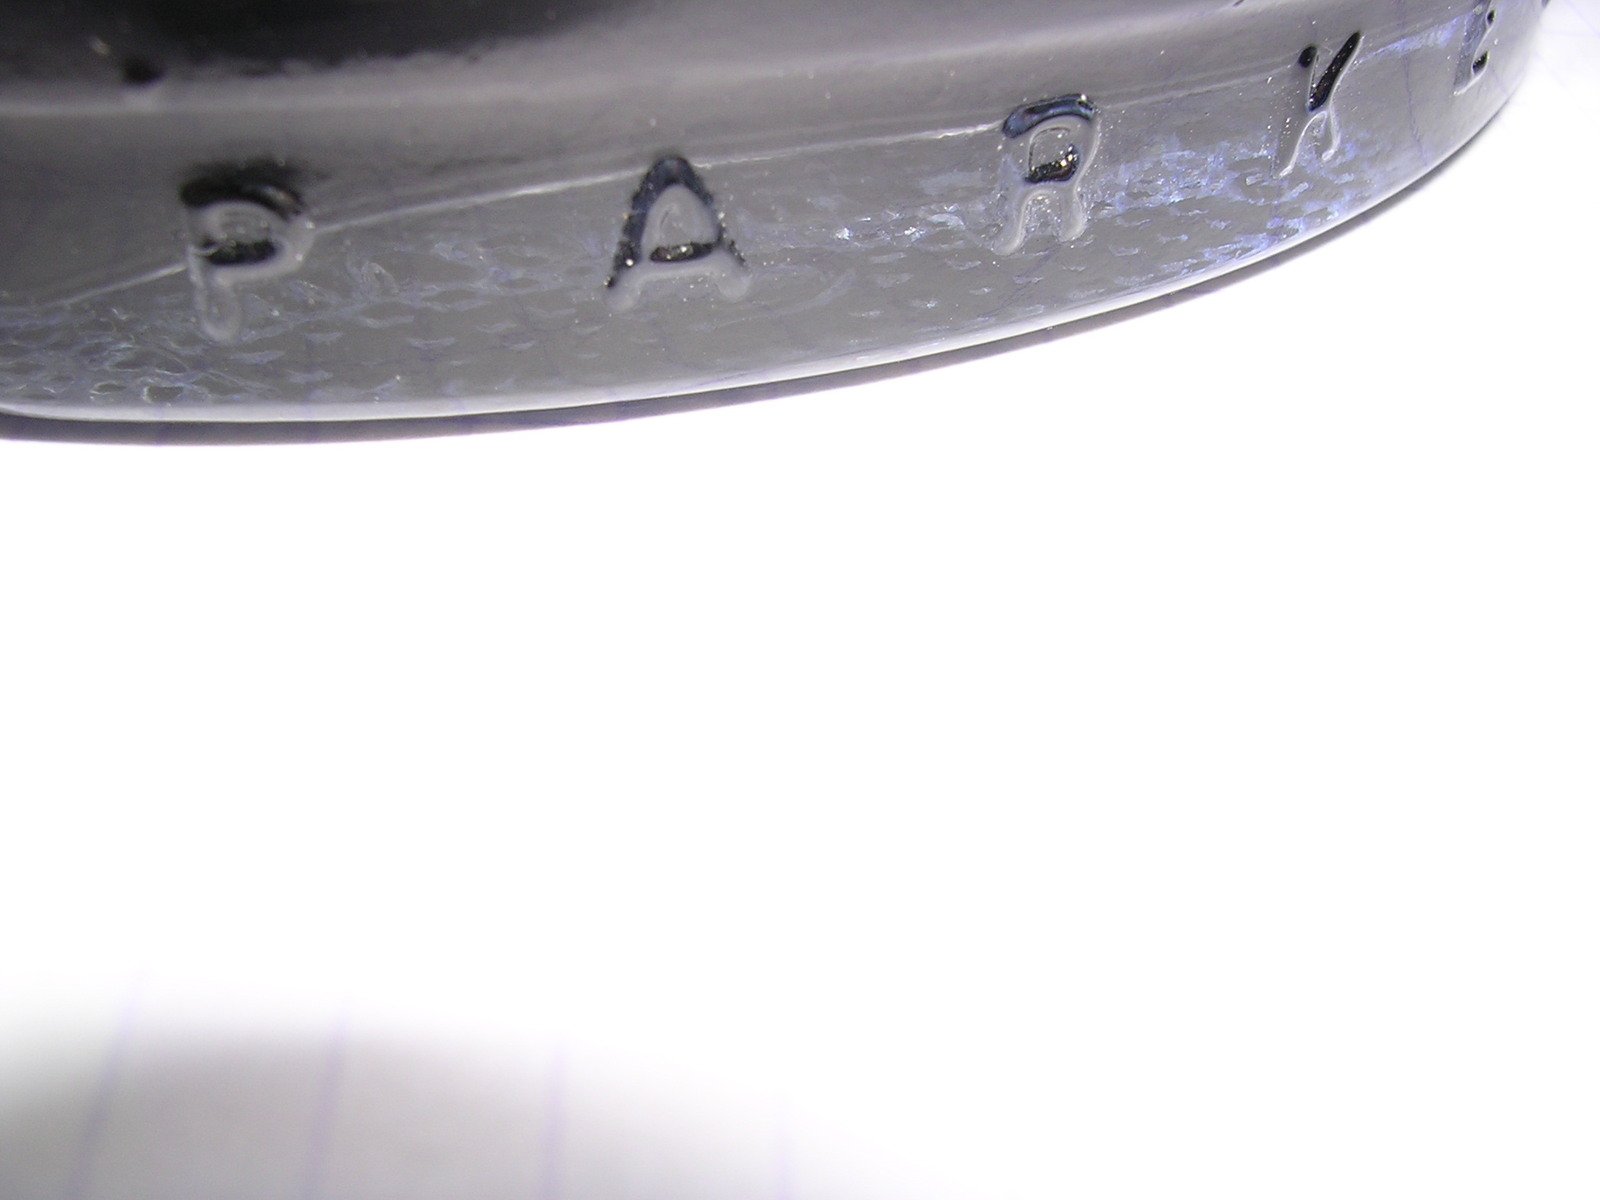 a close up view of the side of a vehicle tire